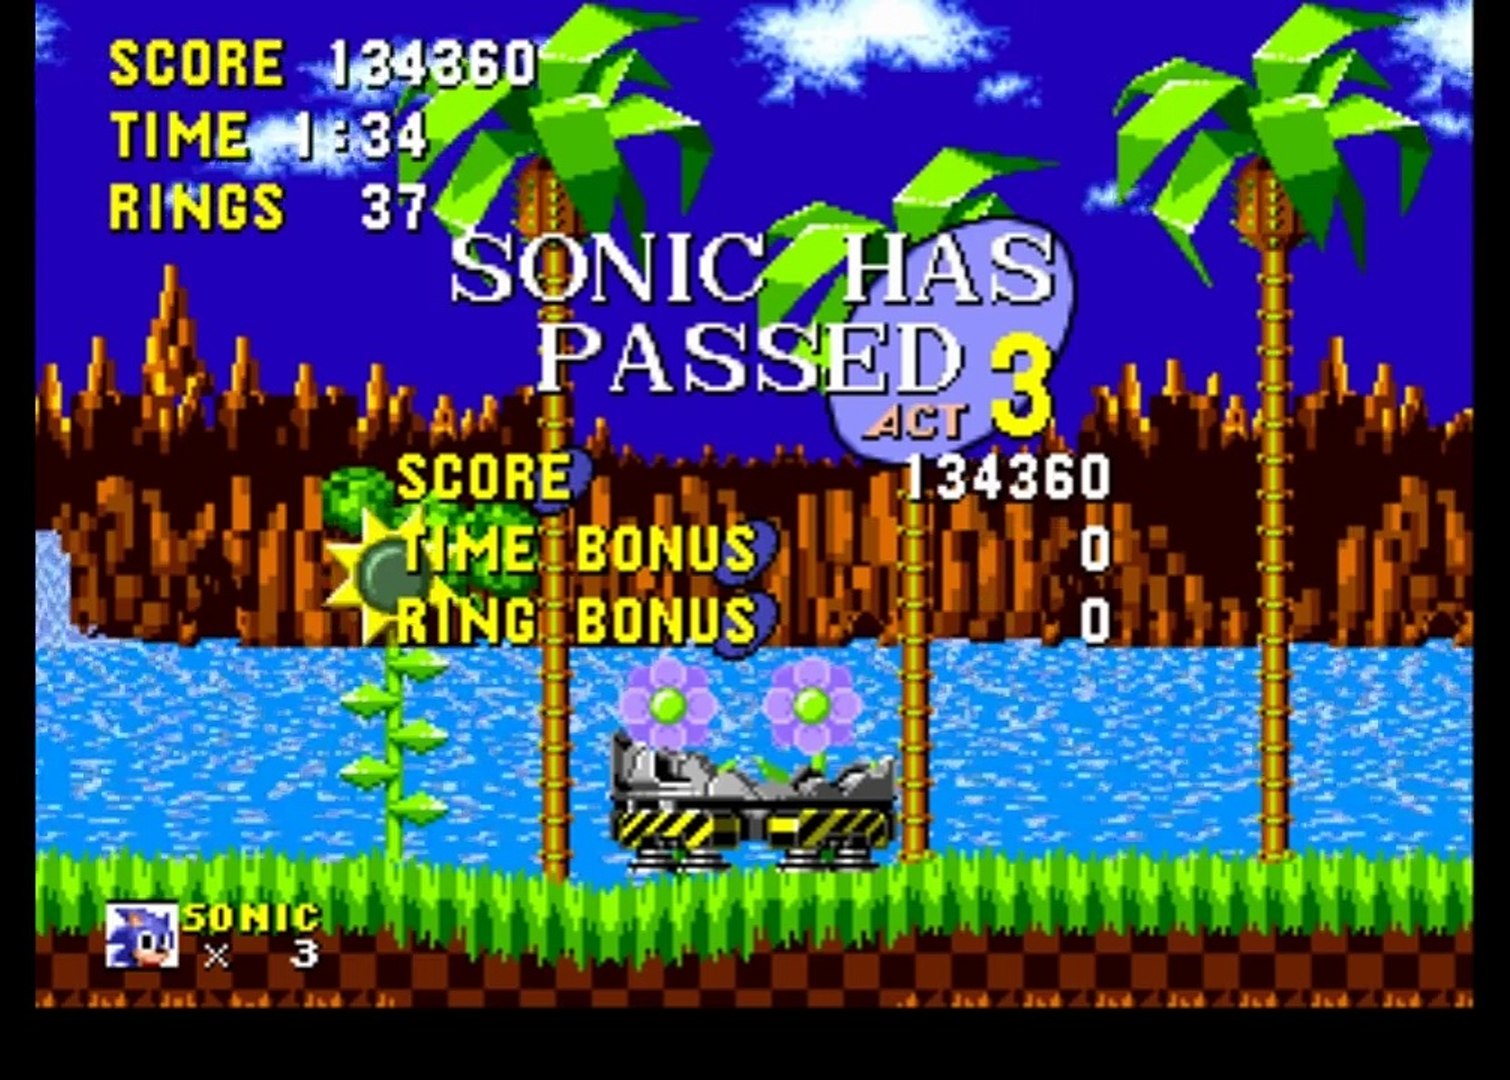 Sonic Classic Heroes (Genesis) All Bosses (No Damage) 